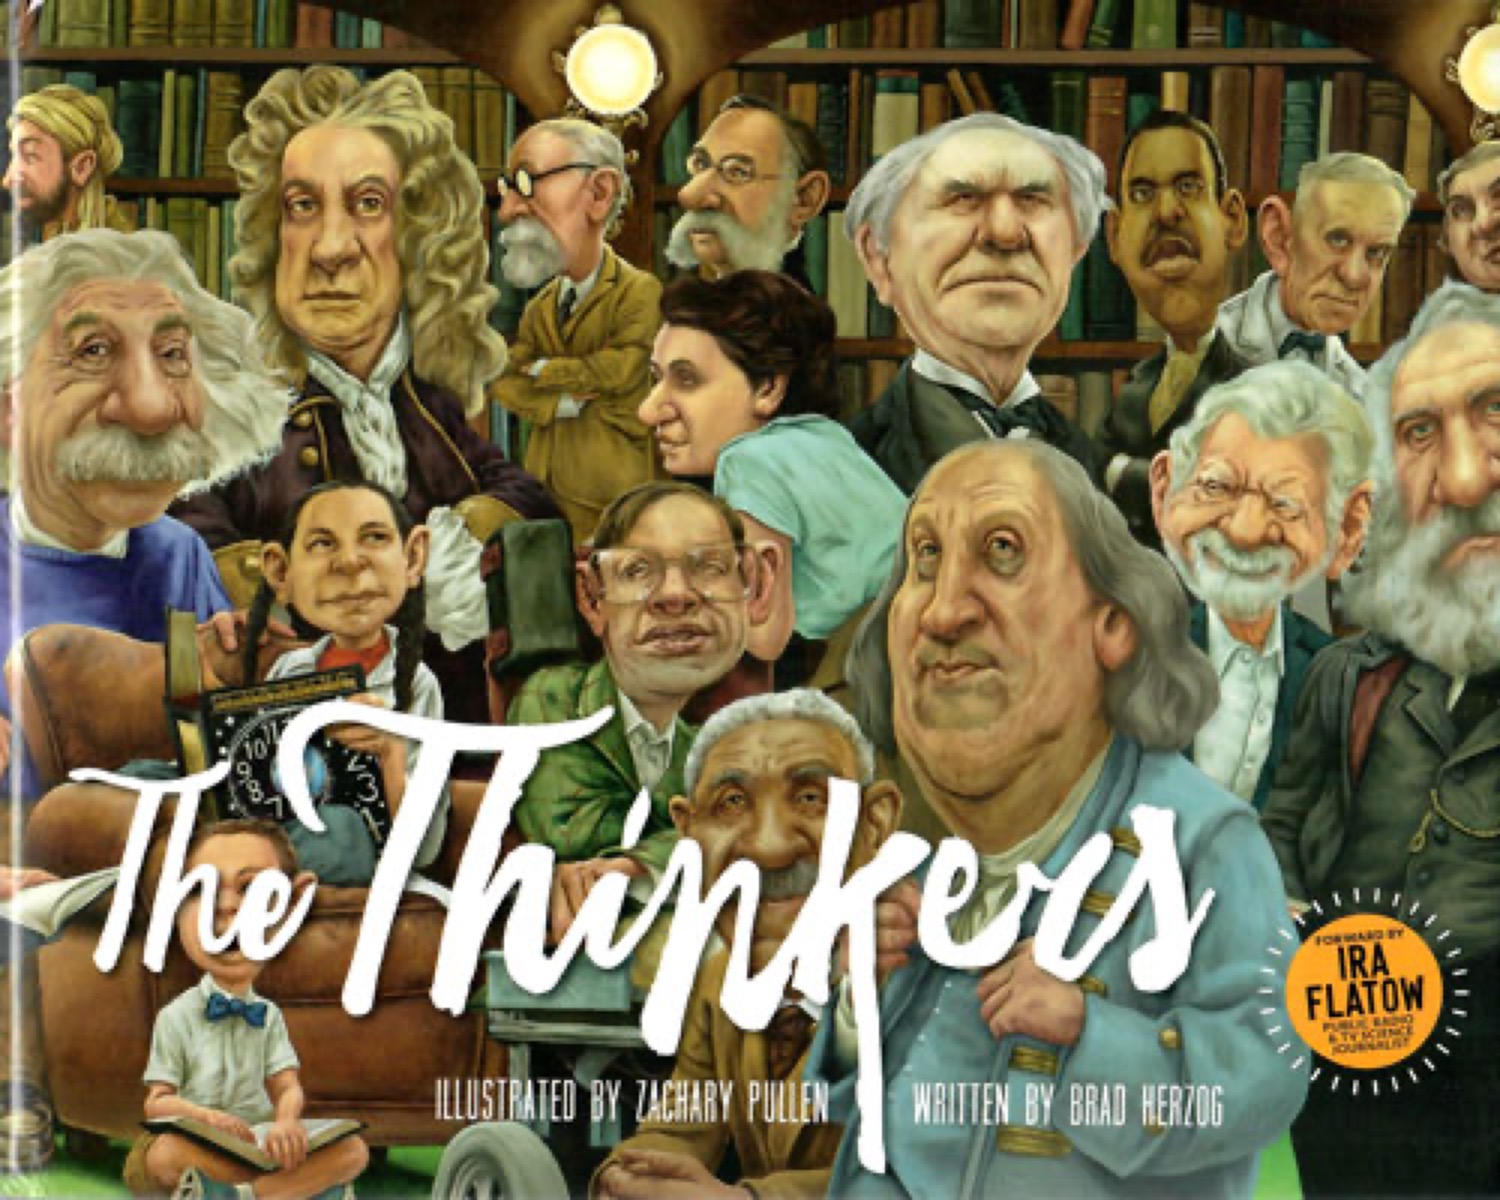 a book cover featuring a gaudy illustration of a collection of charactiatures feating people like ben franklin, albert einstein, and isaac newton to name a few. there's a bout dozen in total, with text 'The Thinkers by Brad Herzog and Zachary Pullen'